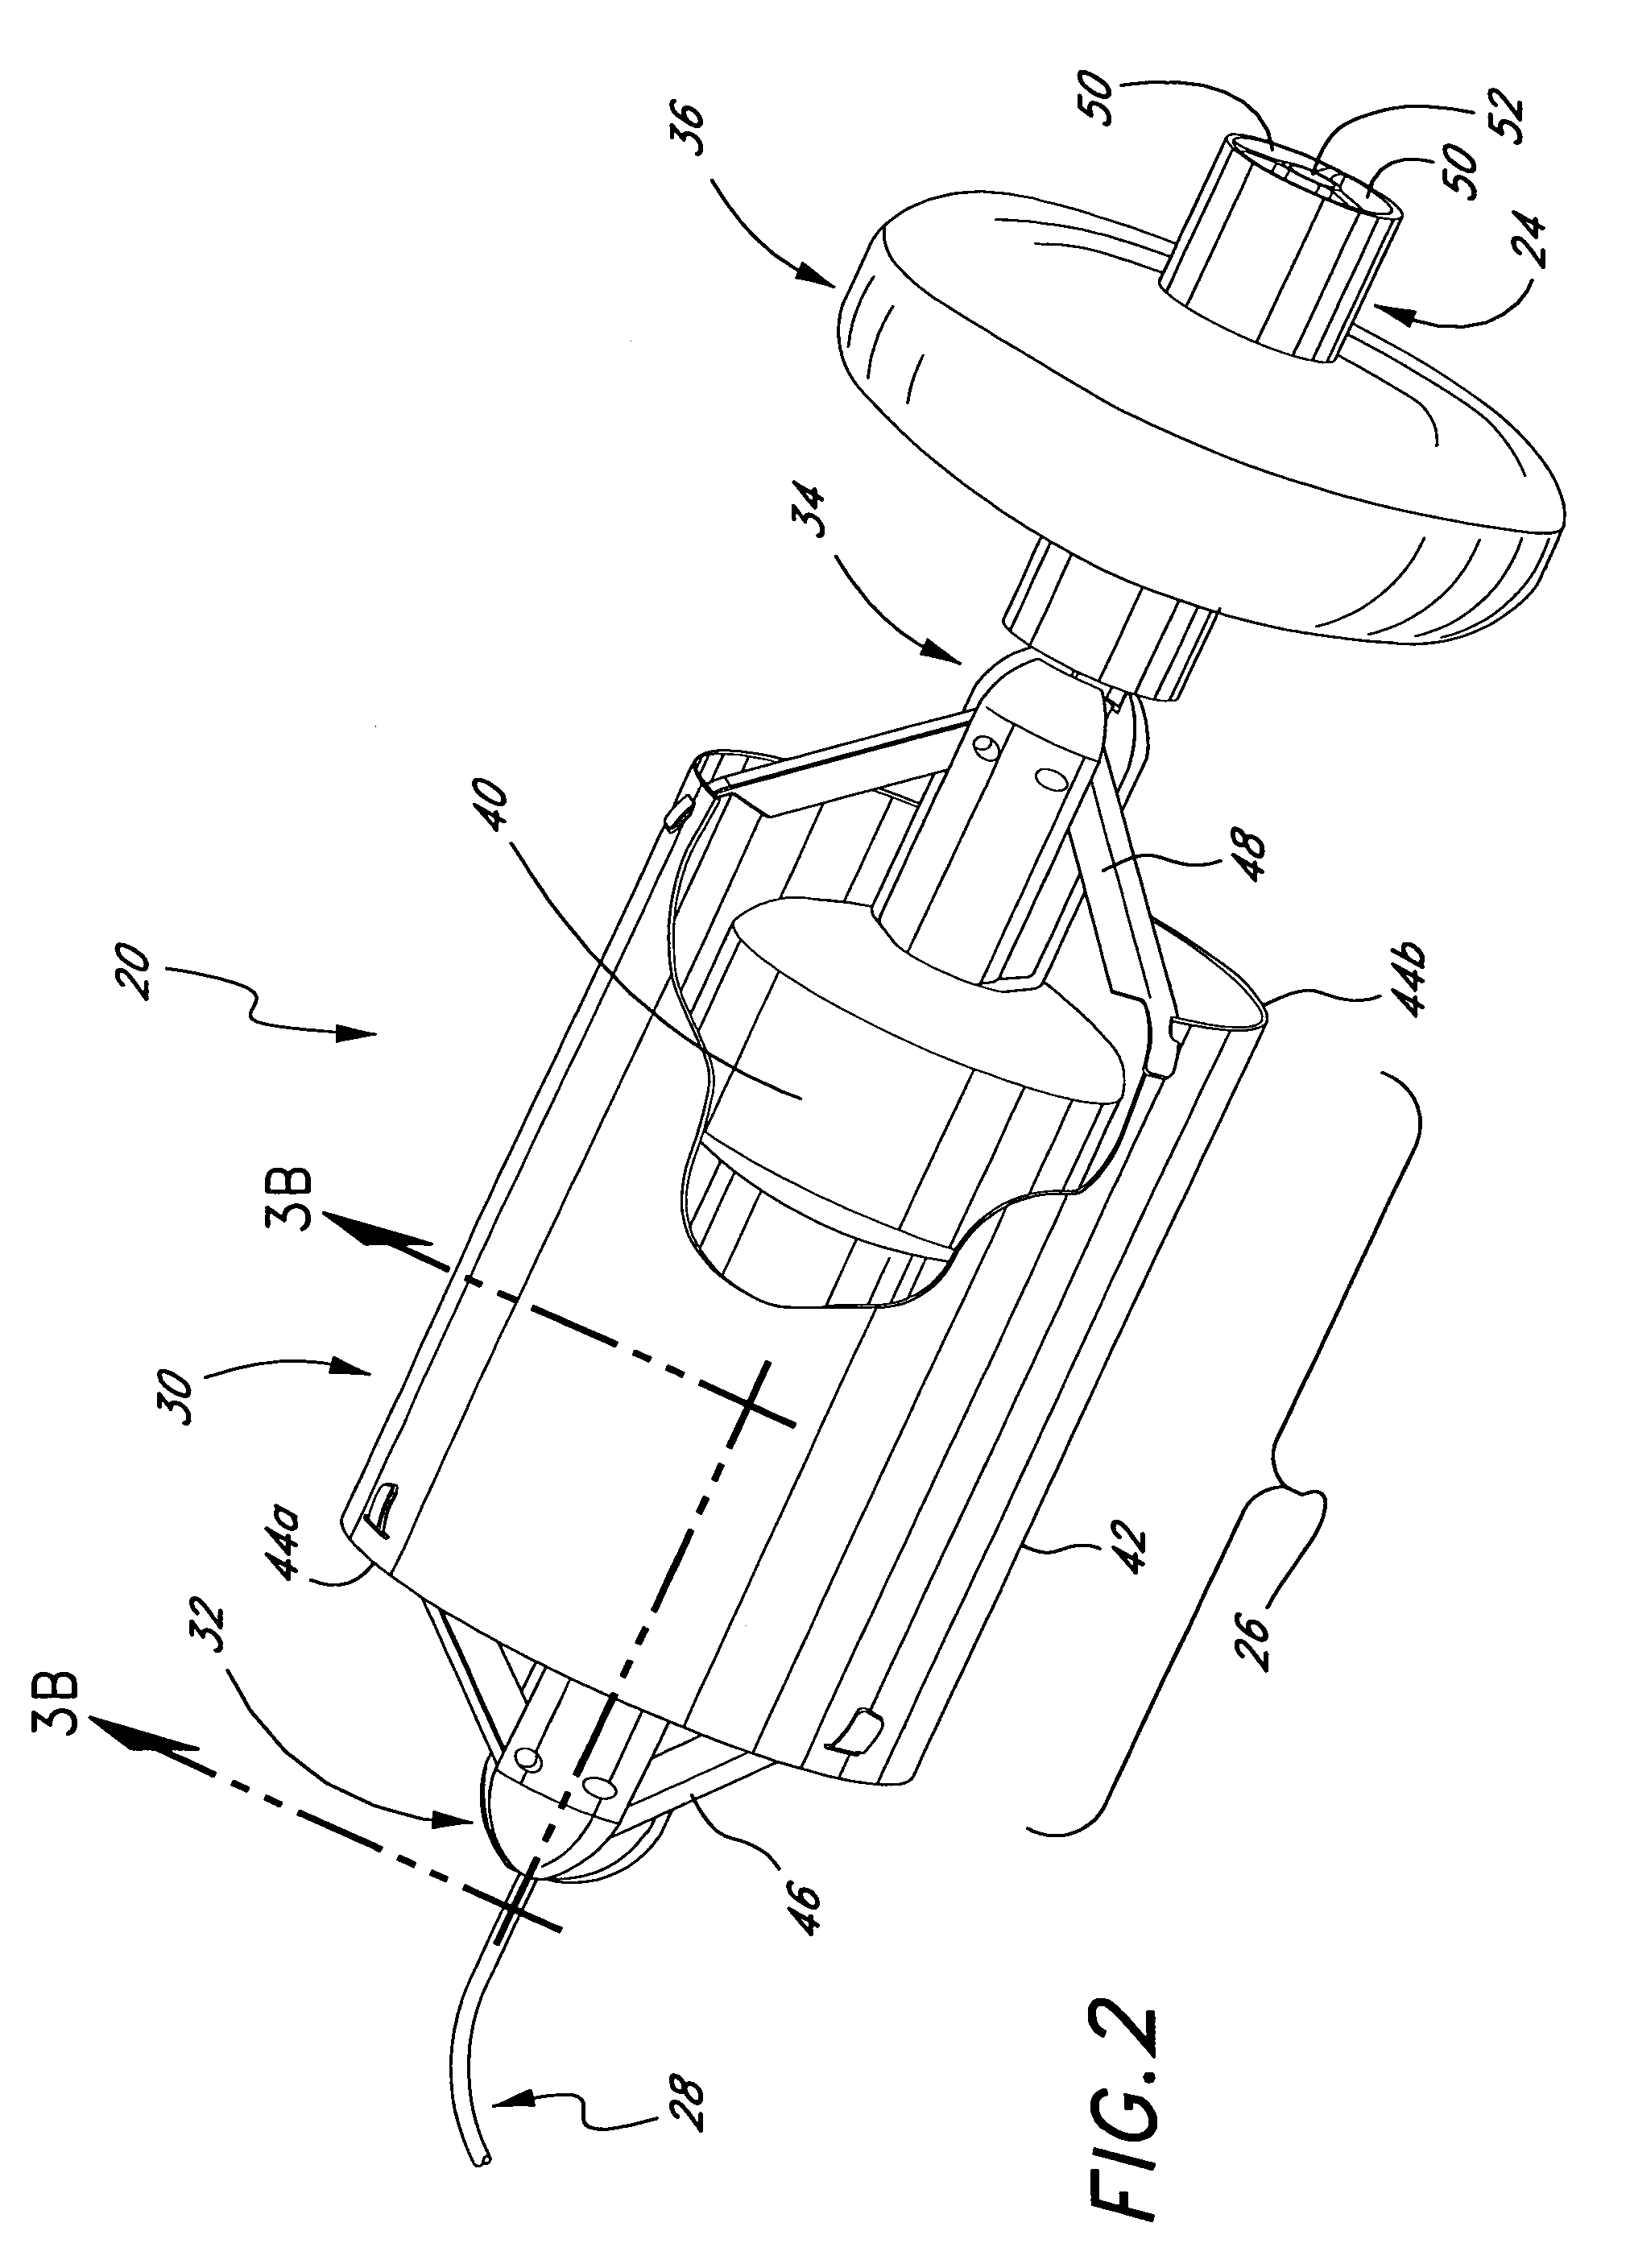 Methods and apparatuses for deploying minimally-invasive heart valves